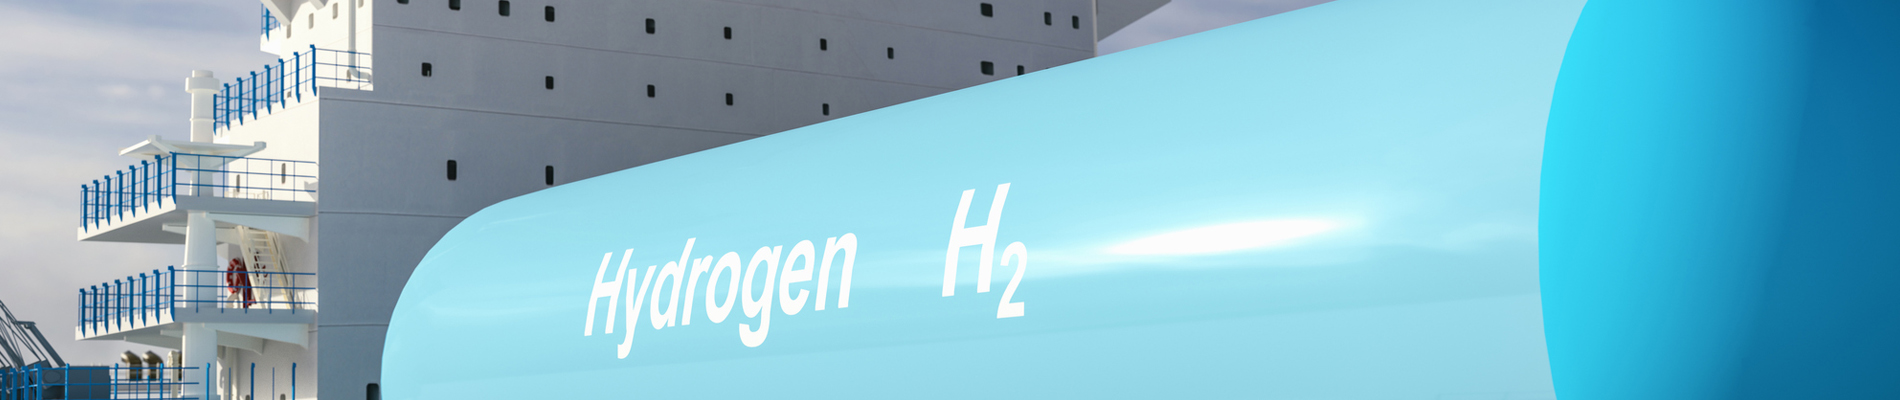 Green hydrogen systems campaign image 2